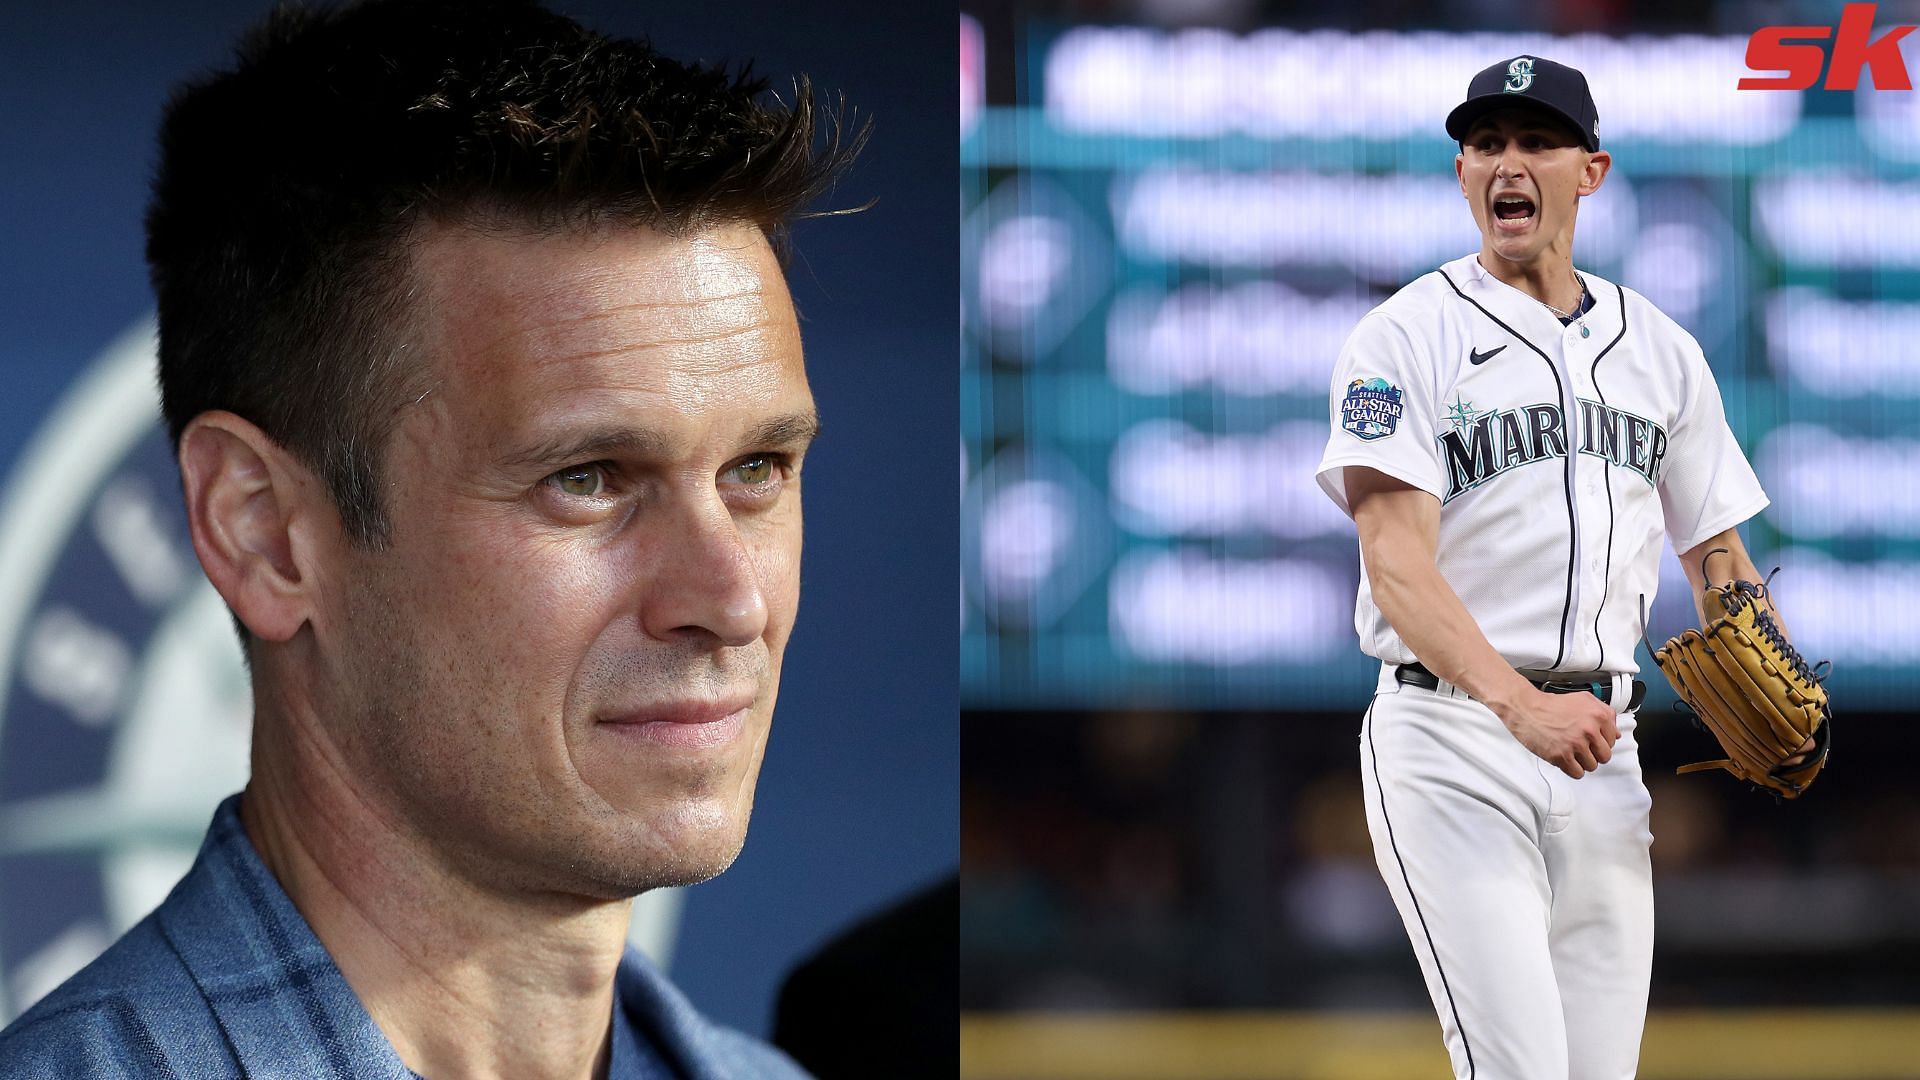 Mariners president Jerry Dipoto stands by George Kirby after